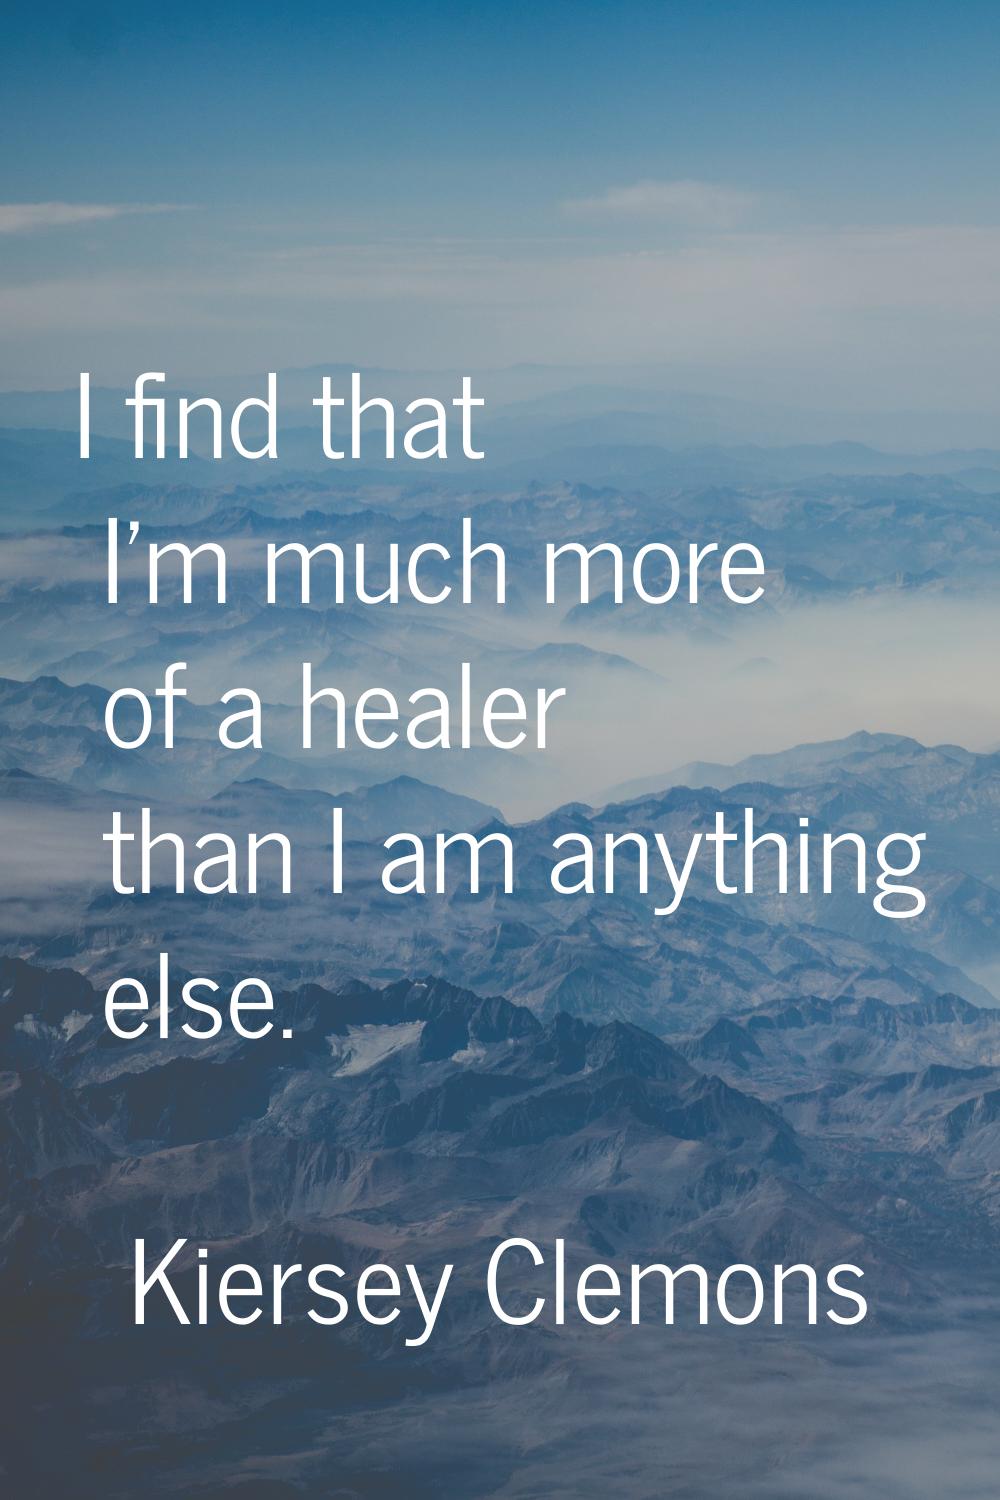 I find that I'm much more of a healer than I am anything else.